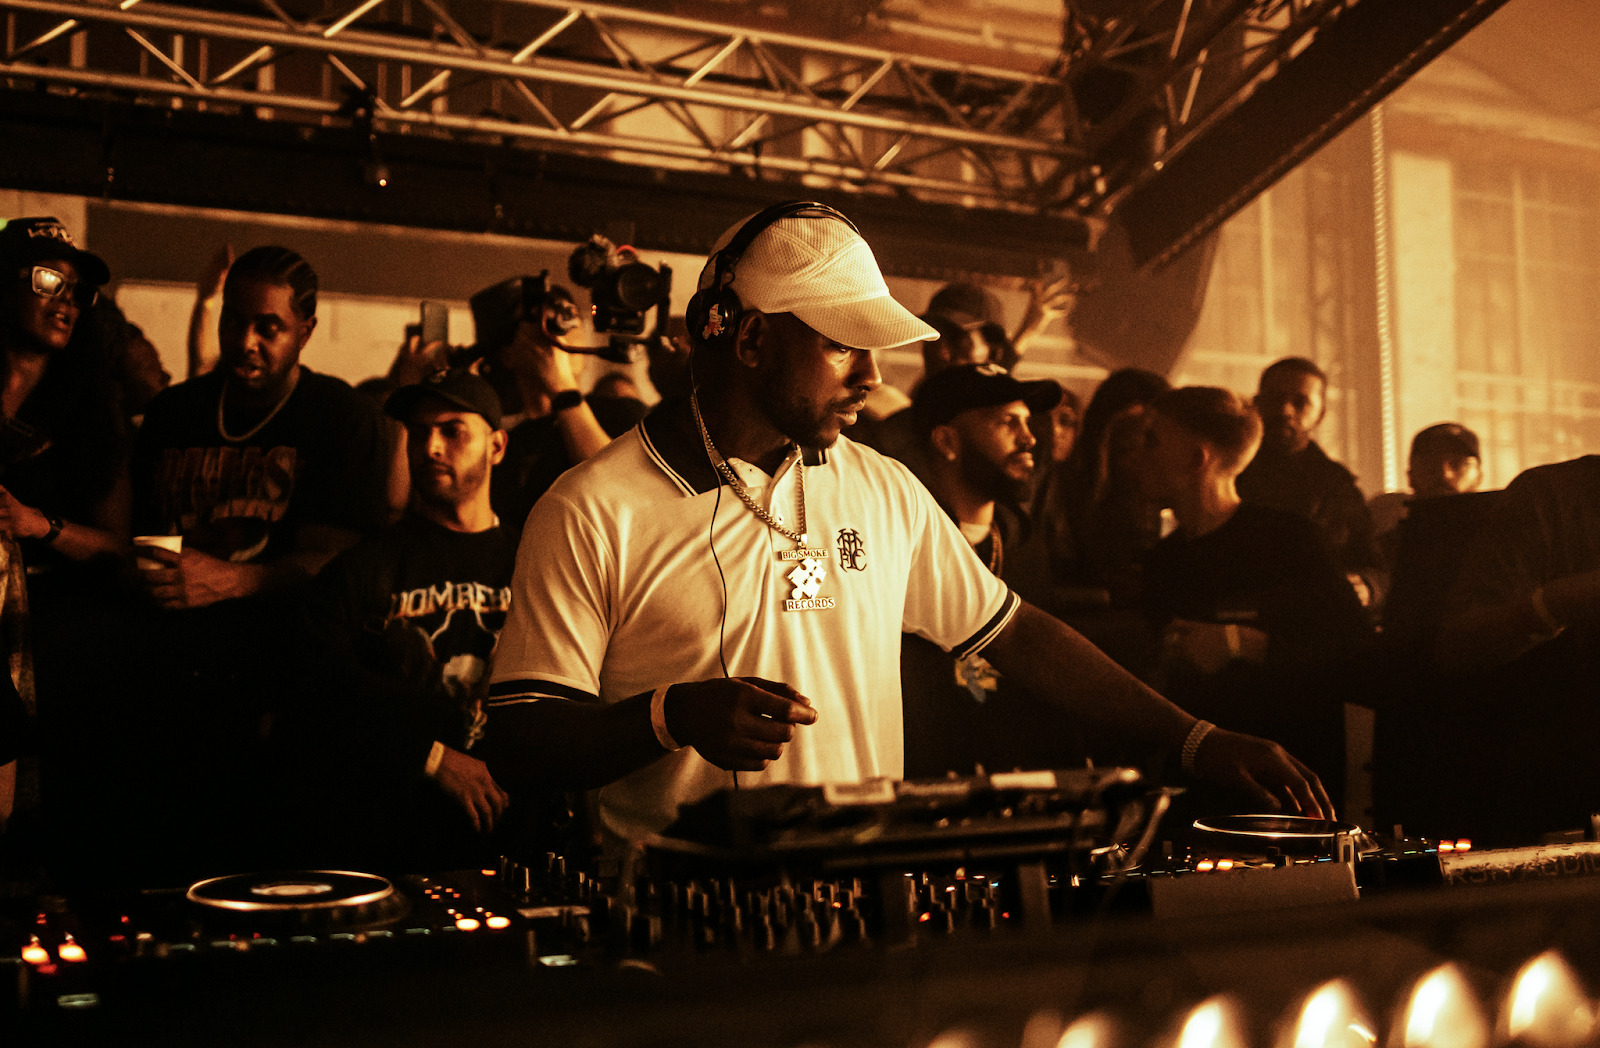 WE ARE FSTVL ANNOUNCES SKEPTA FOR AUGUST BANK HOLIDAY SHOW